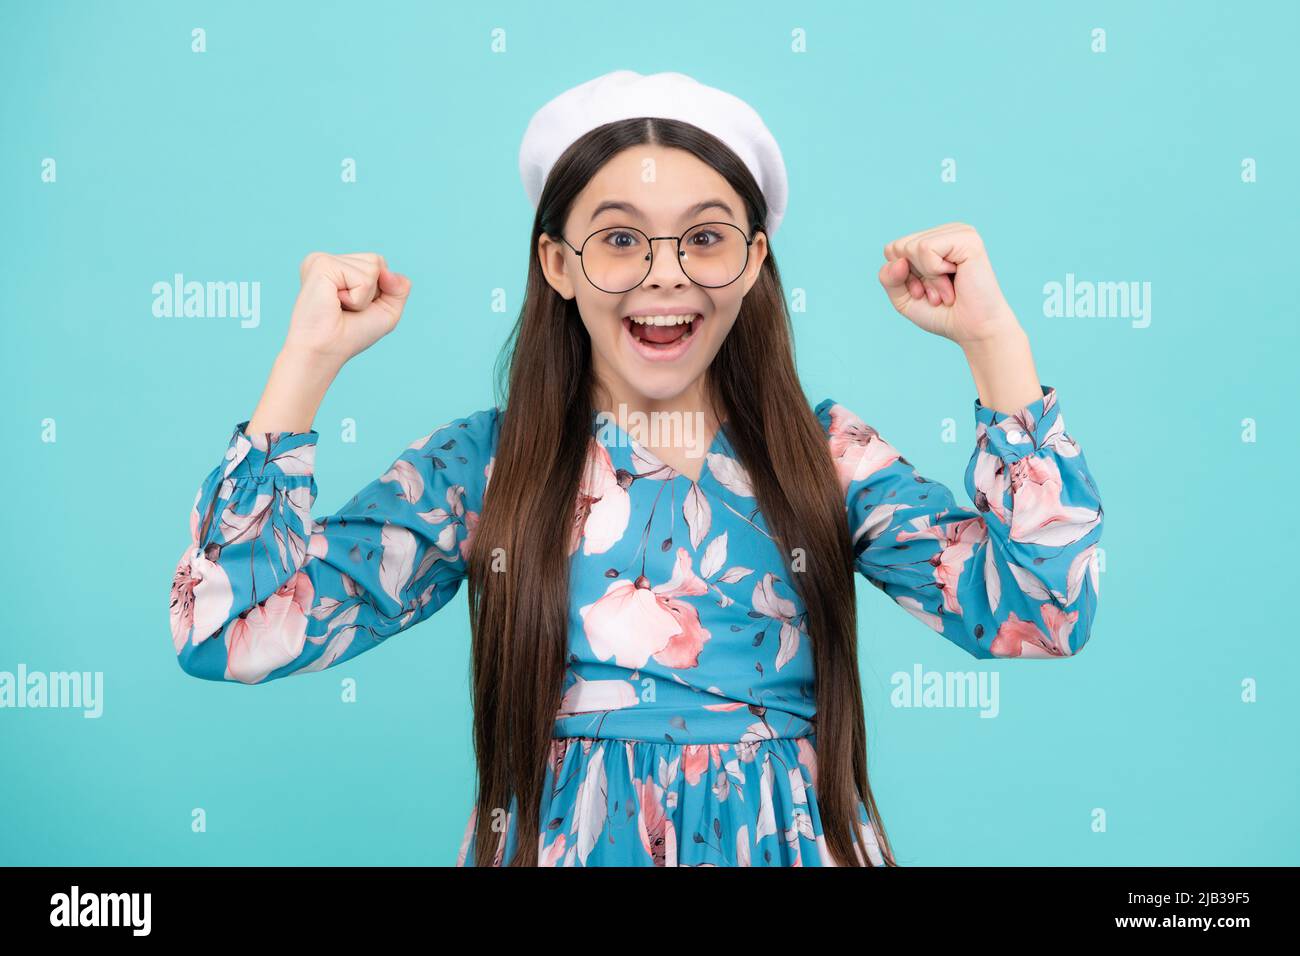 Studio portrait of teenager child doing winner gesture. Kid rejoicing, yes victory champion gesture, fist pump. Excited teenager, amazed and cheerful Stock Photo